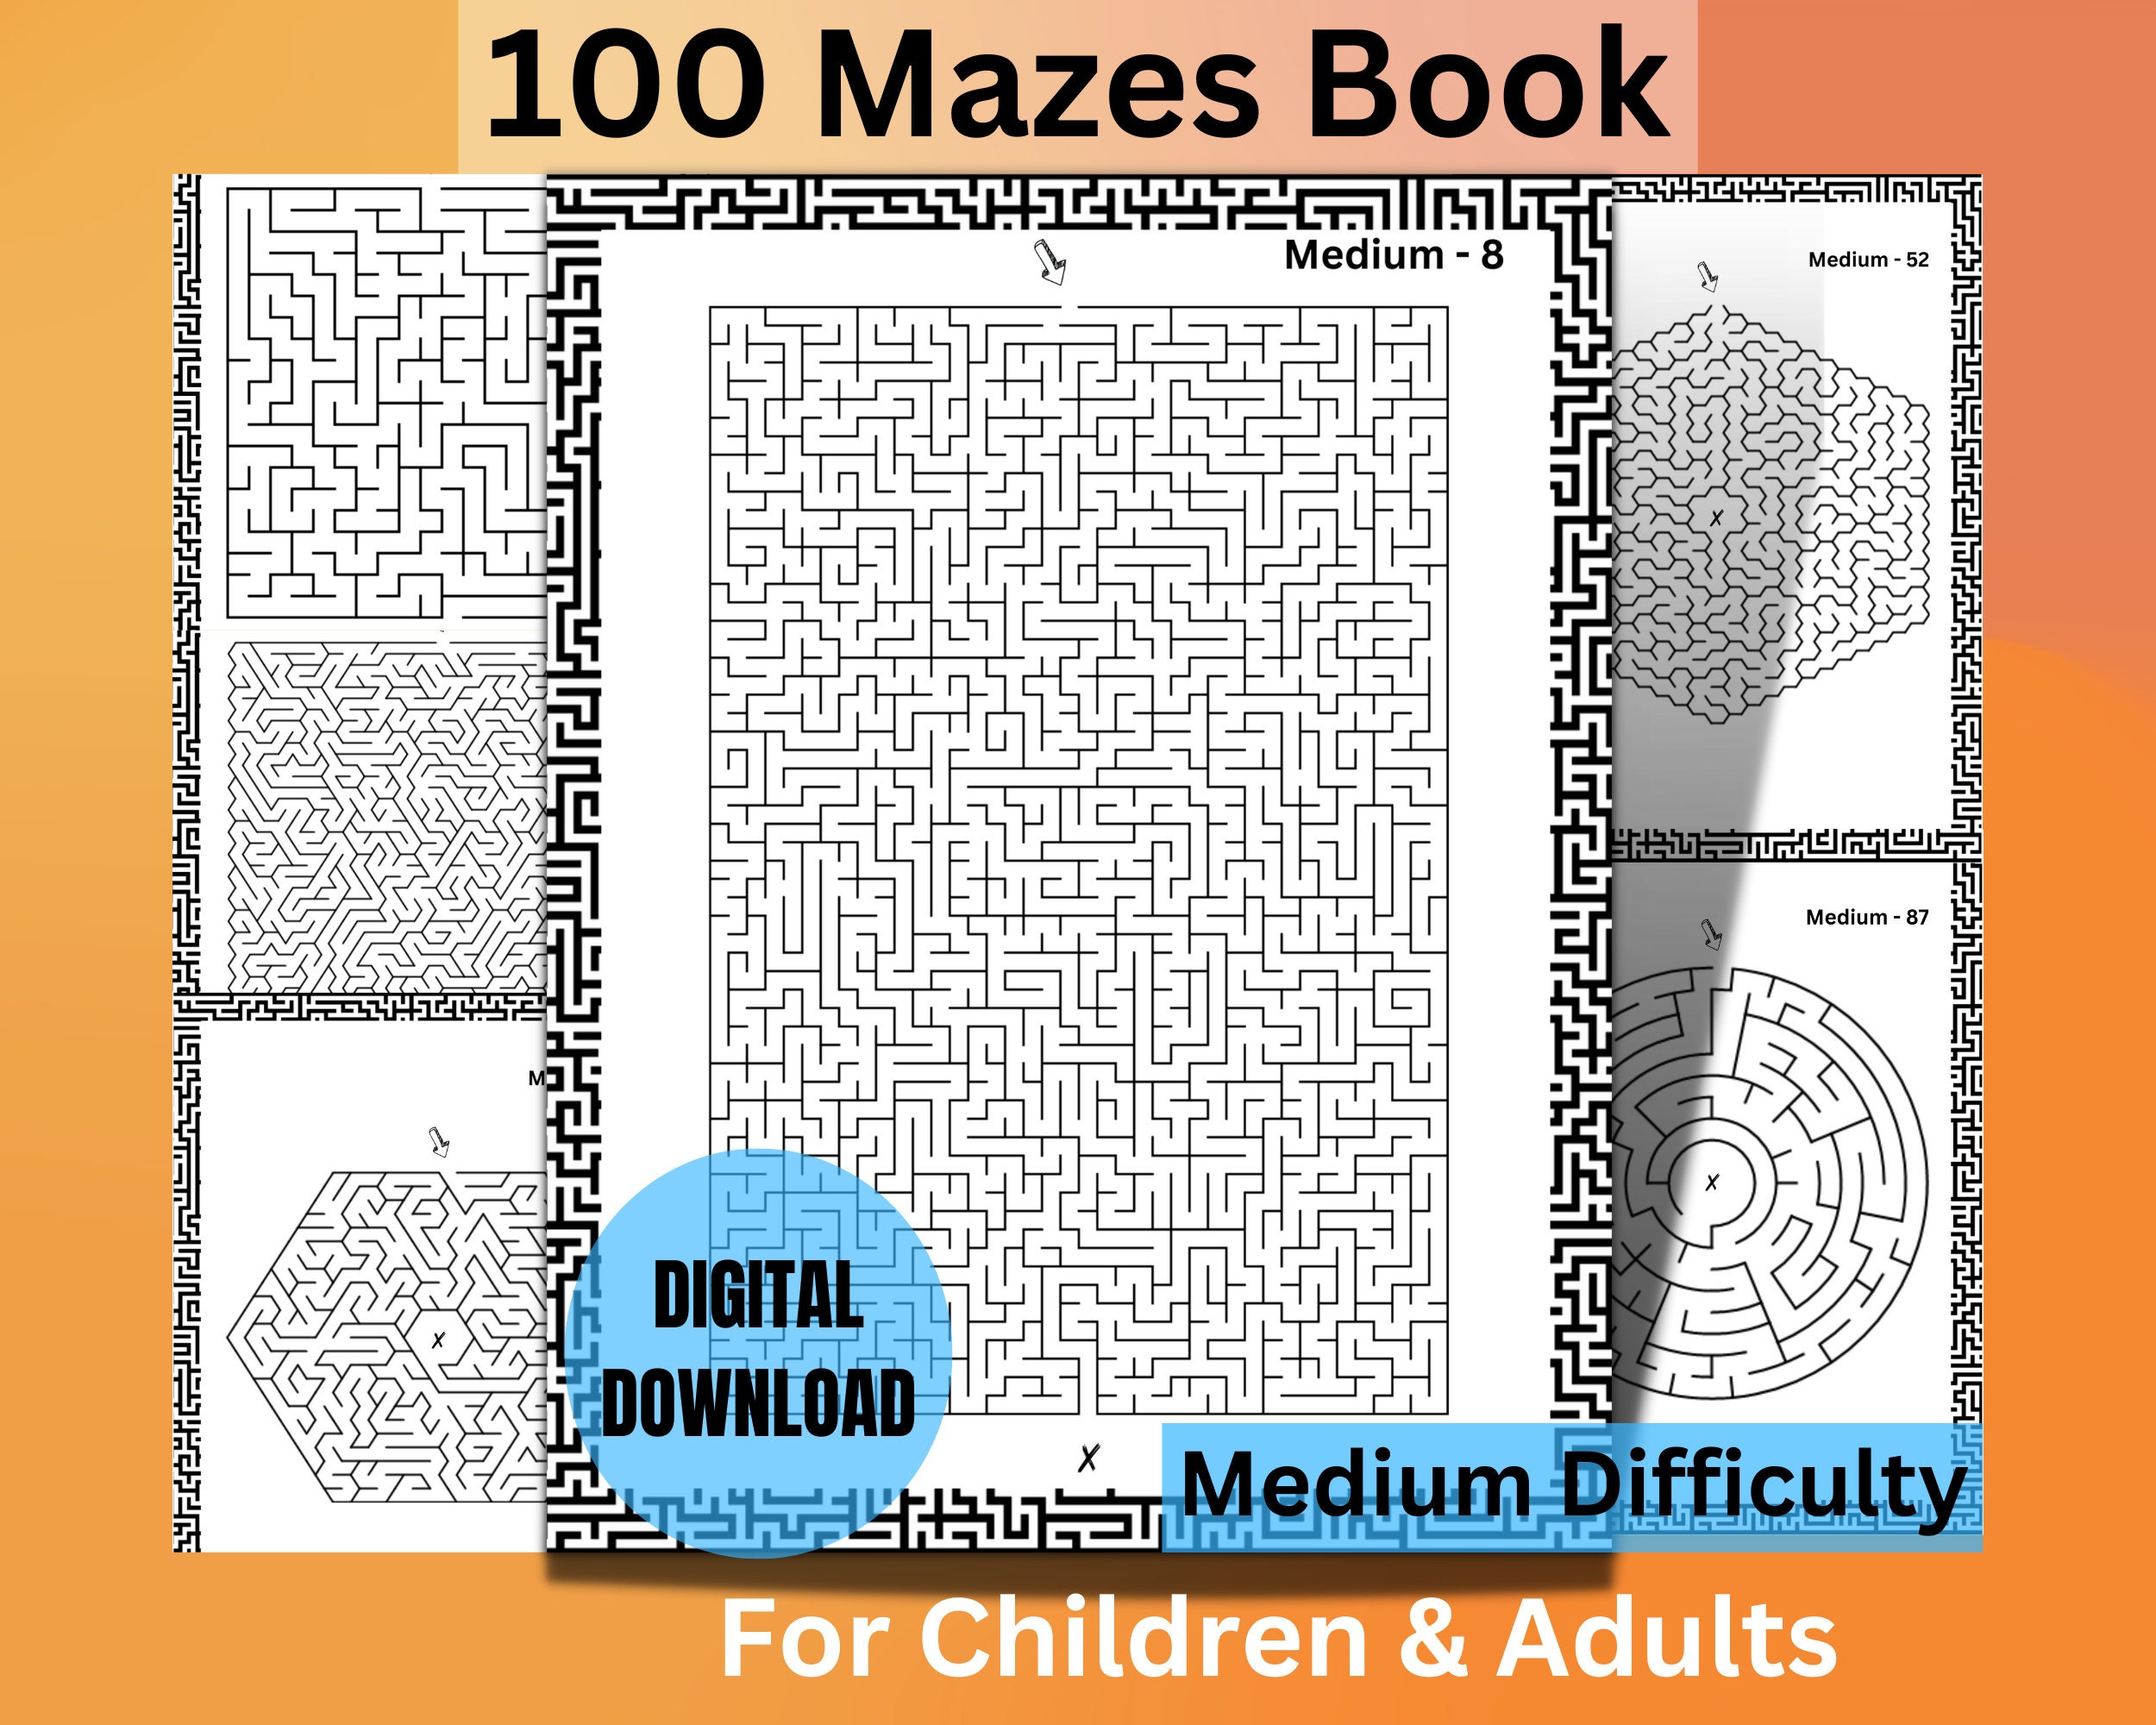 mazes: mazes book children puzzle book sets for adults word search mazes  and puzzles puzzle book for kids ages dog maze bowl (Paperback)